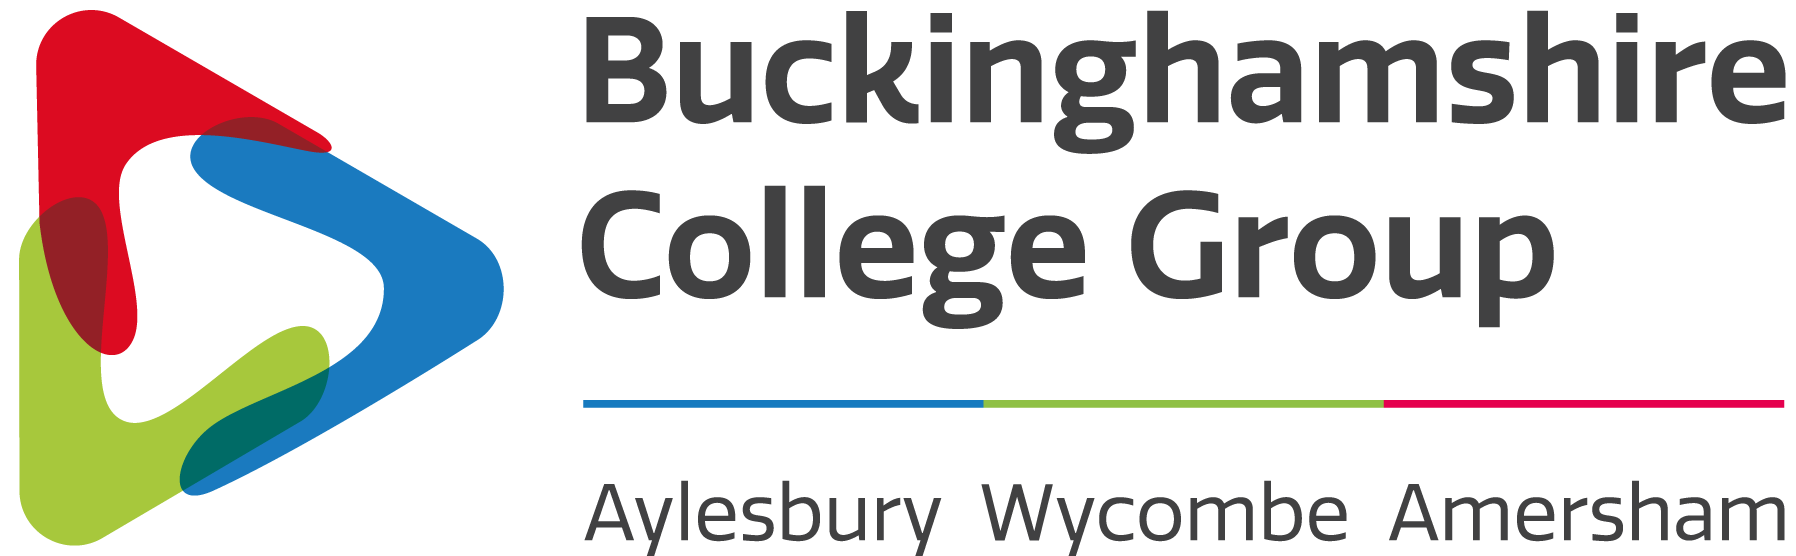 Buckinghamshire College Group (formerly Amersham And Wycombe College) | United Kingdom